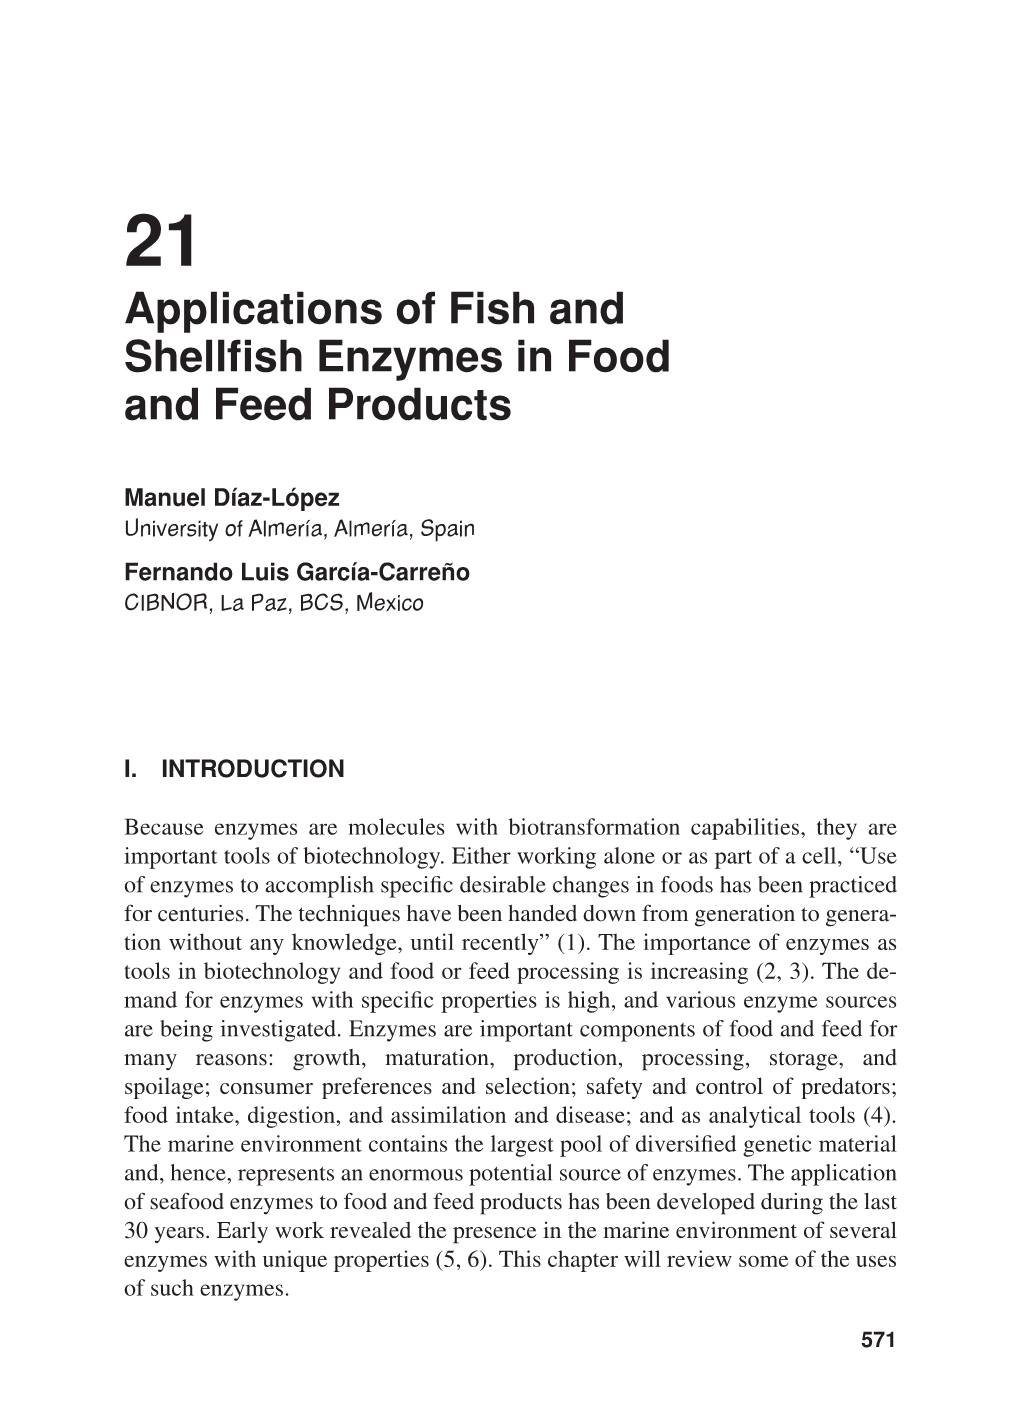 Applications of Fish and Shellfish Enzymes in Food and Feed Products